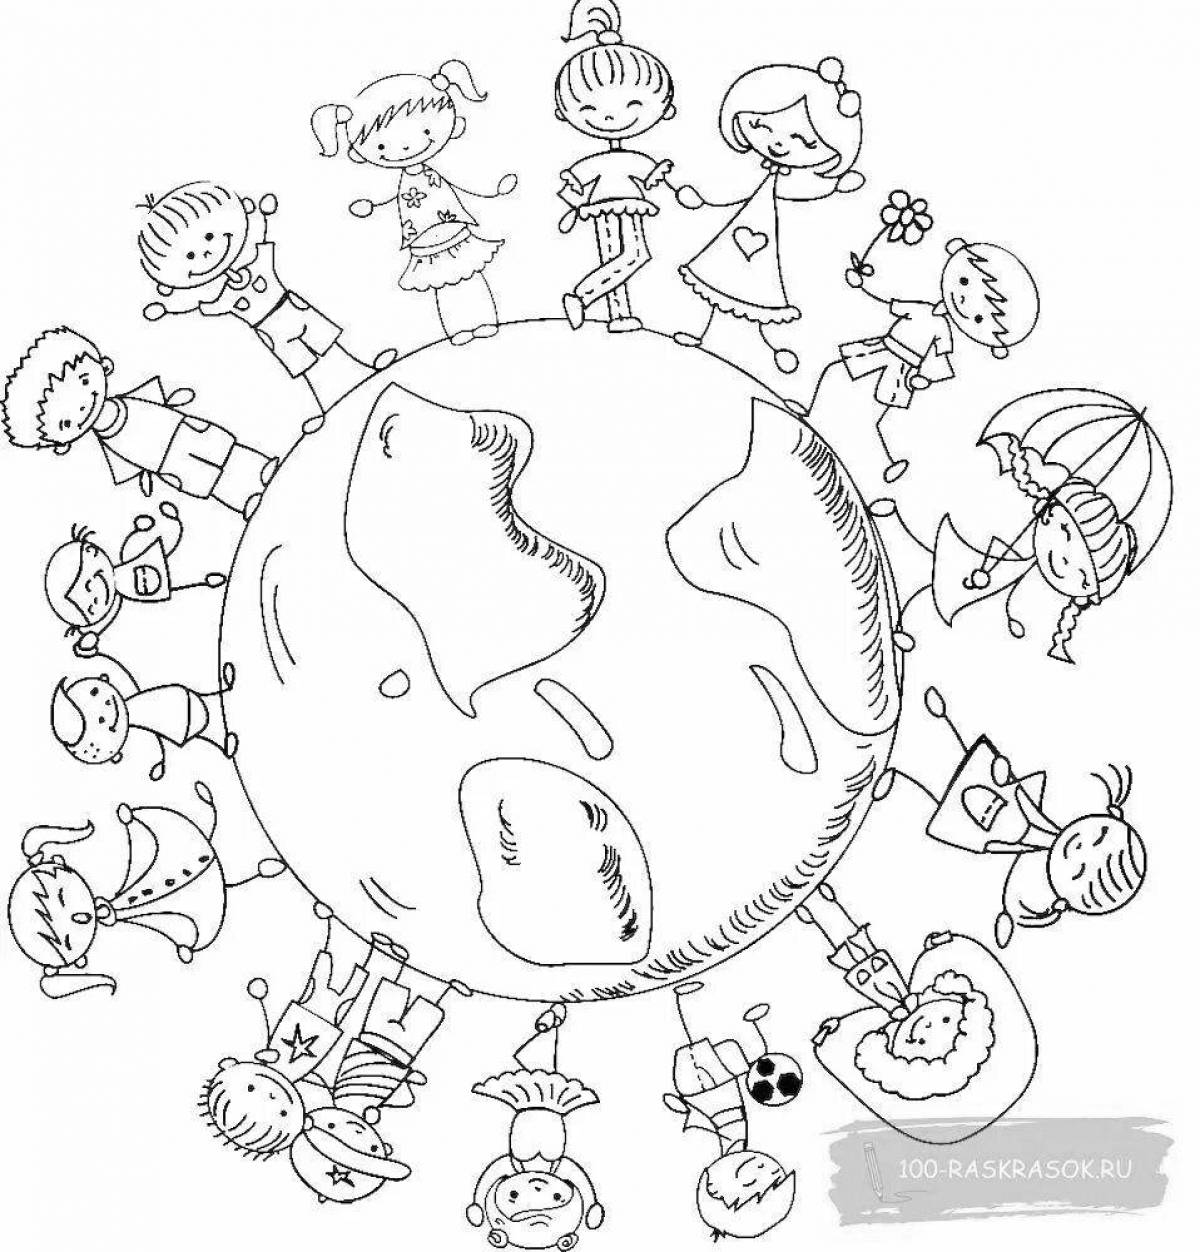 Glorious world on earth coloring page